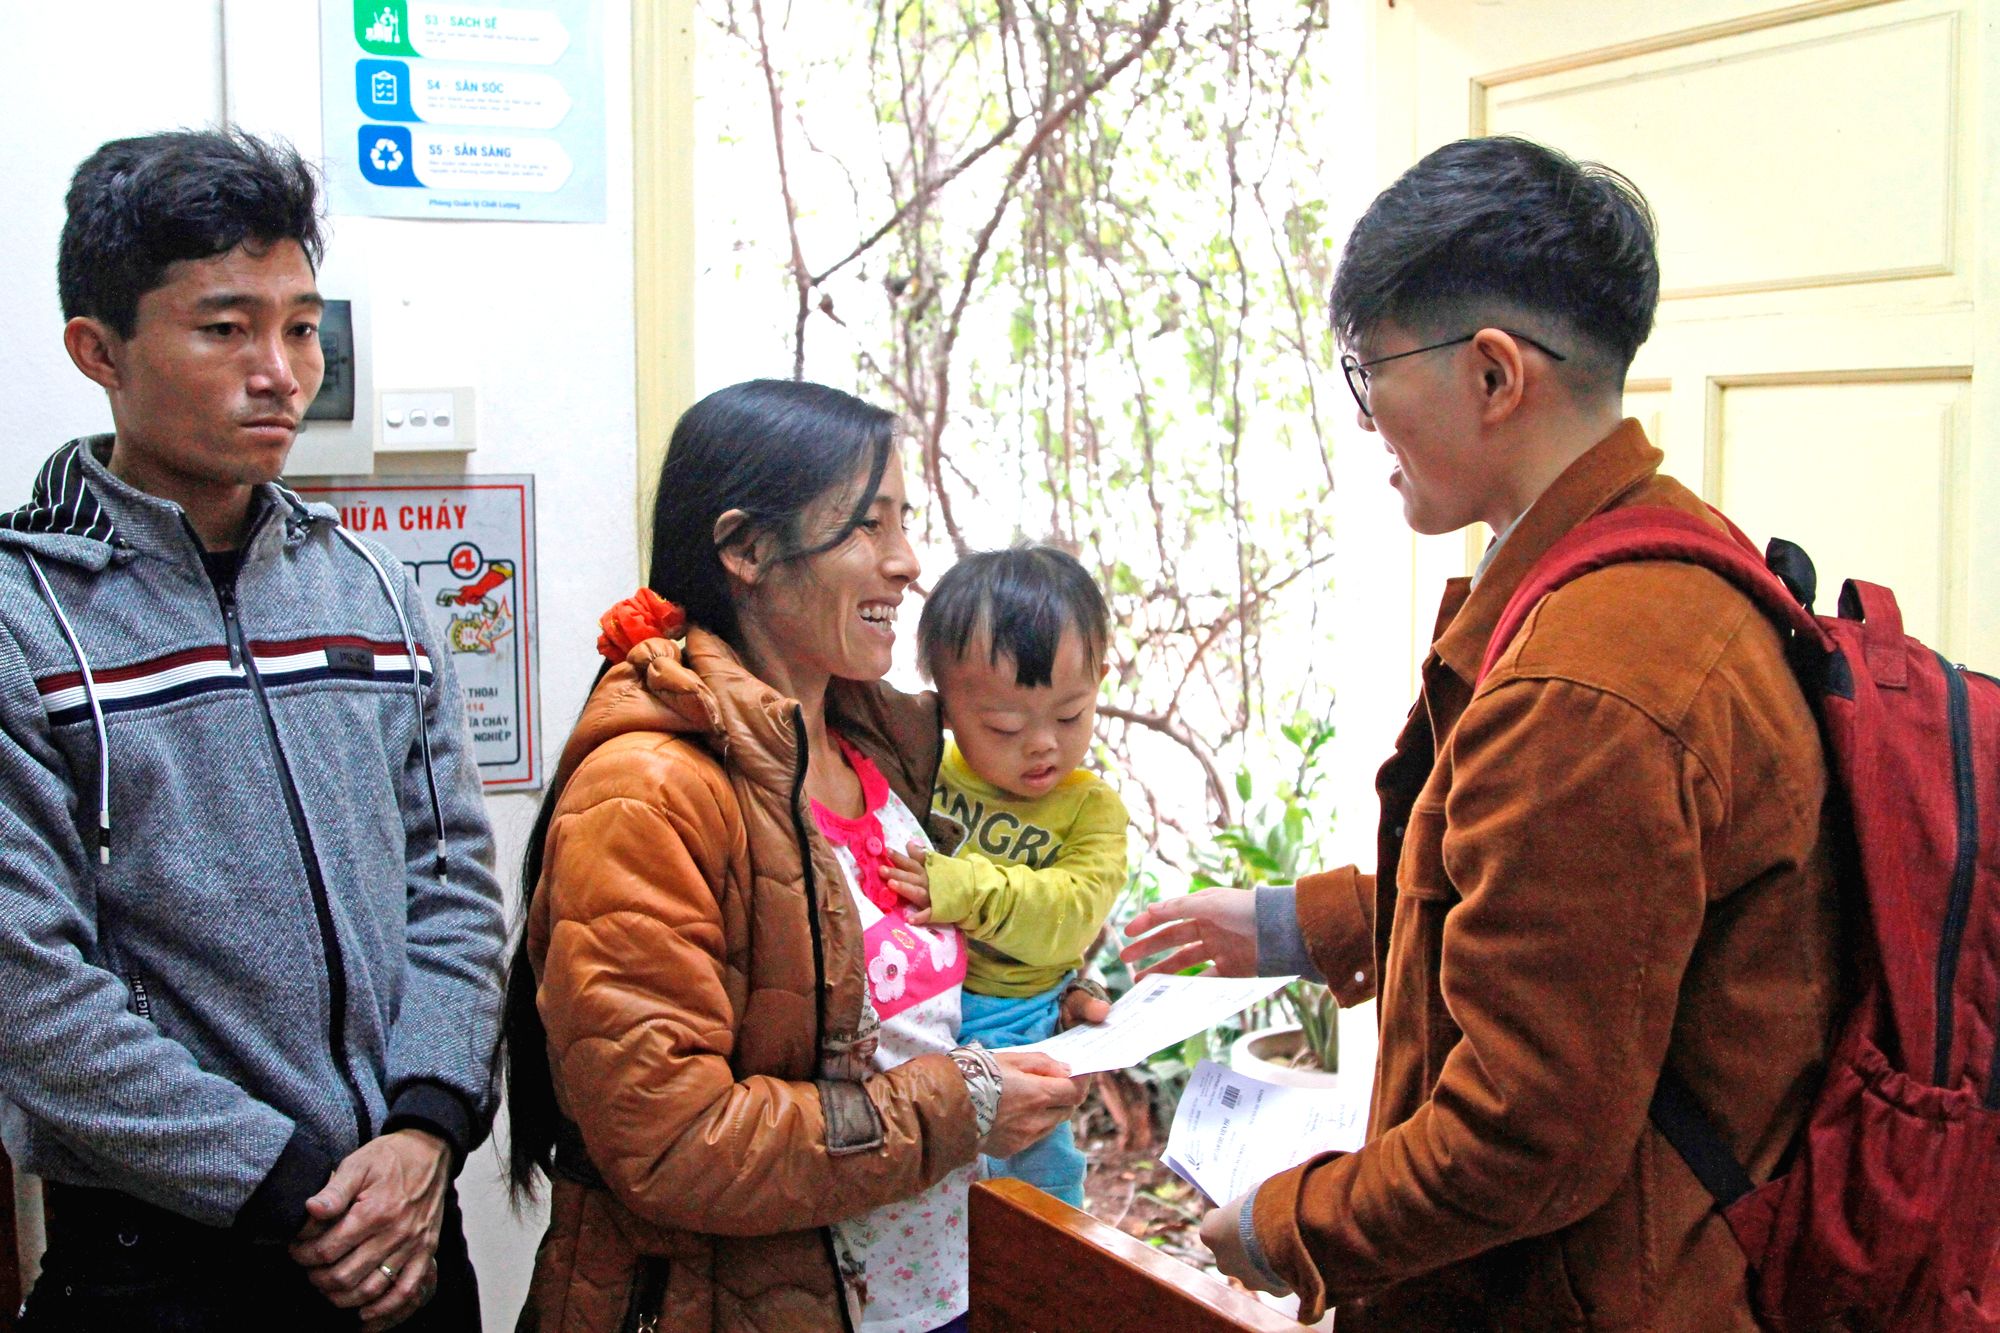 Current Media members presented a total of 25 million VND to ten families with children in the Vietnam National Hospital of Pediatrics. 